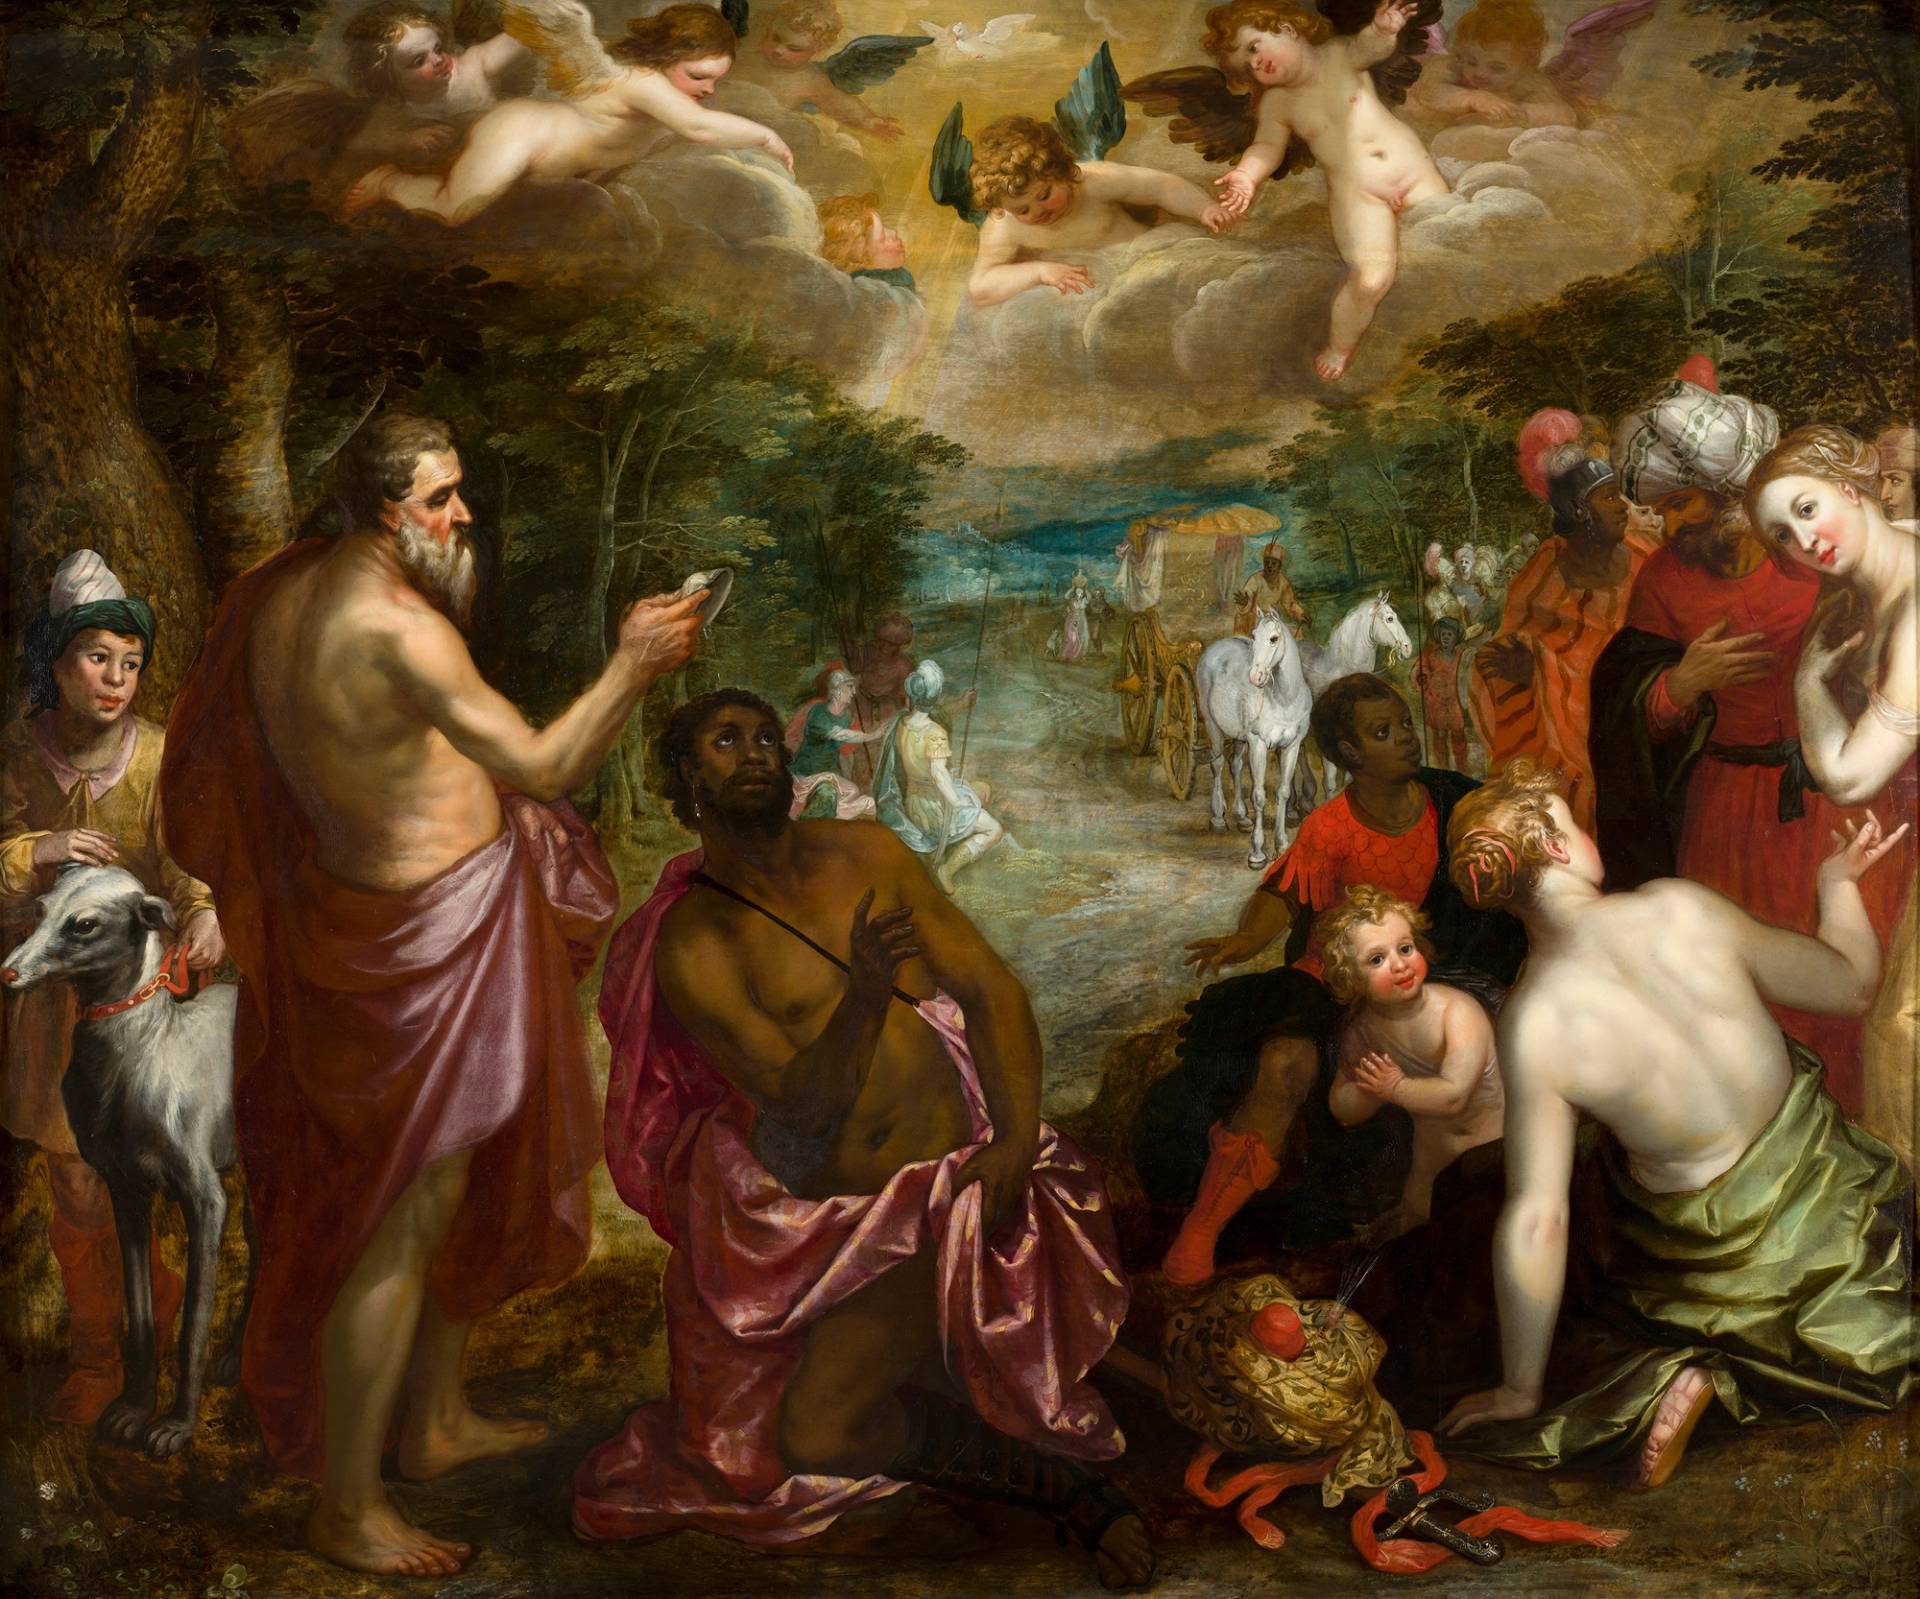 'The Baptism of Queen Candace's Eunuch,' circa 1625-30, attributed to Hendrick van Balen and Jan Brueghel the Younger